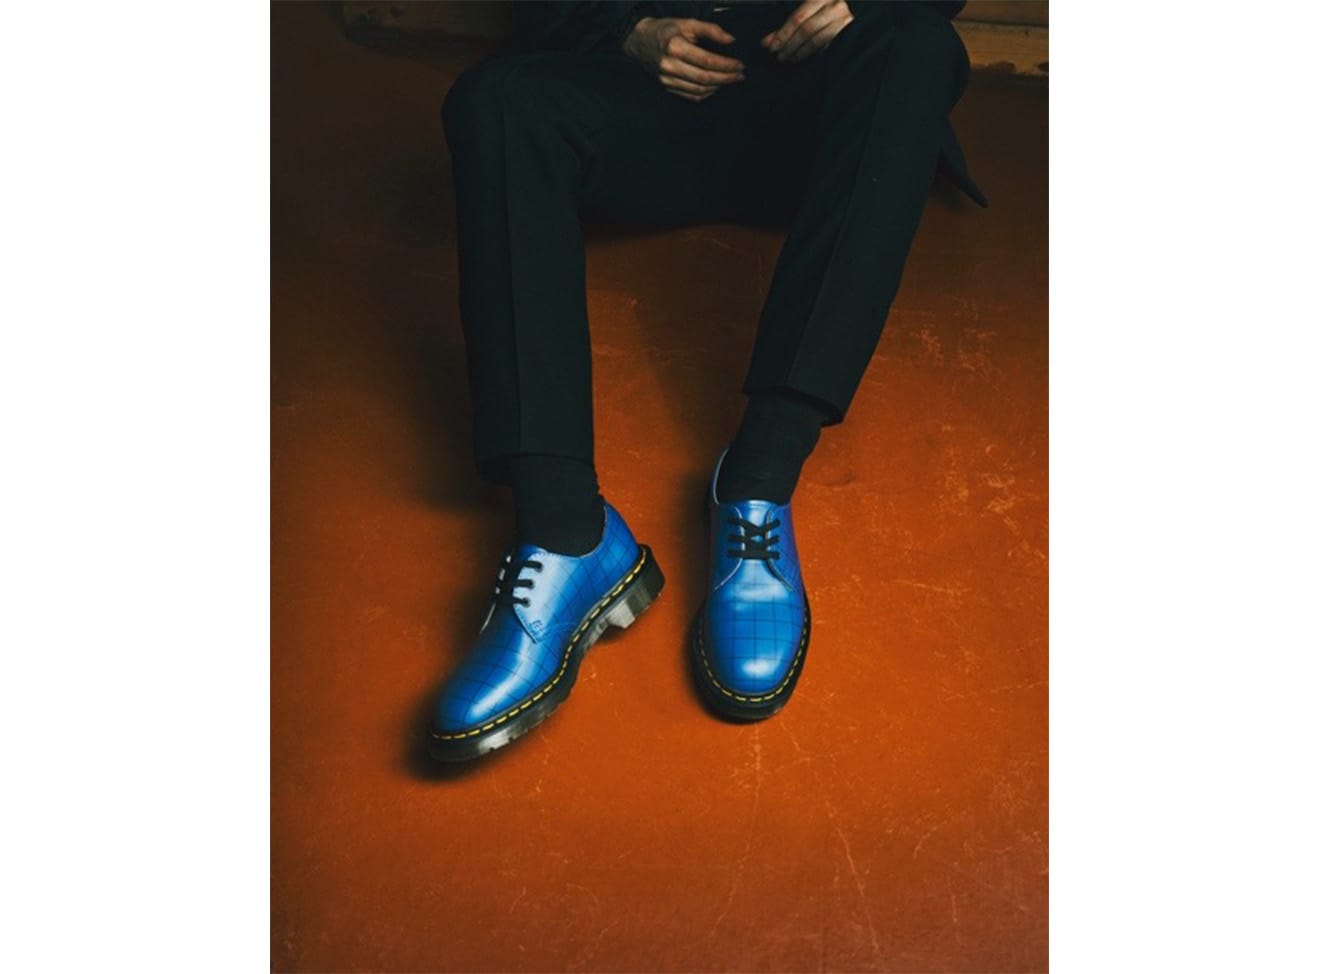 Model sitting down wearing a blue patent leather Dr. Marten x Undercover shoe.